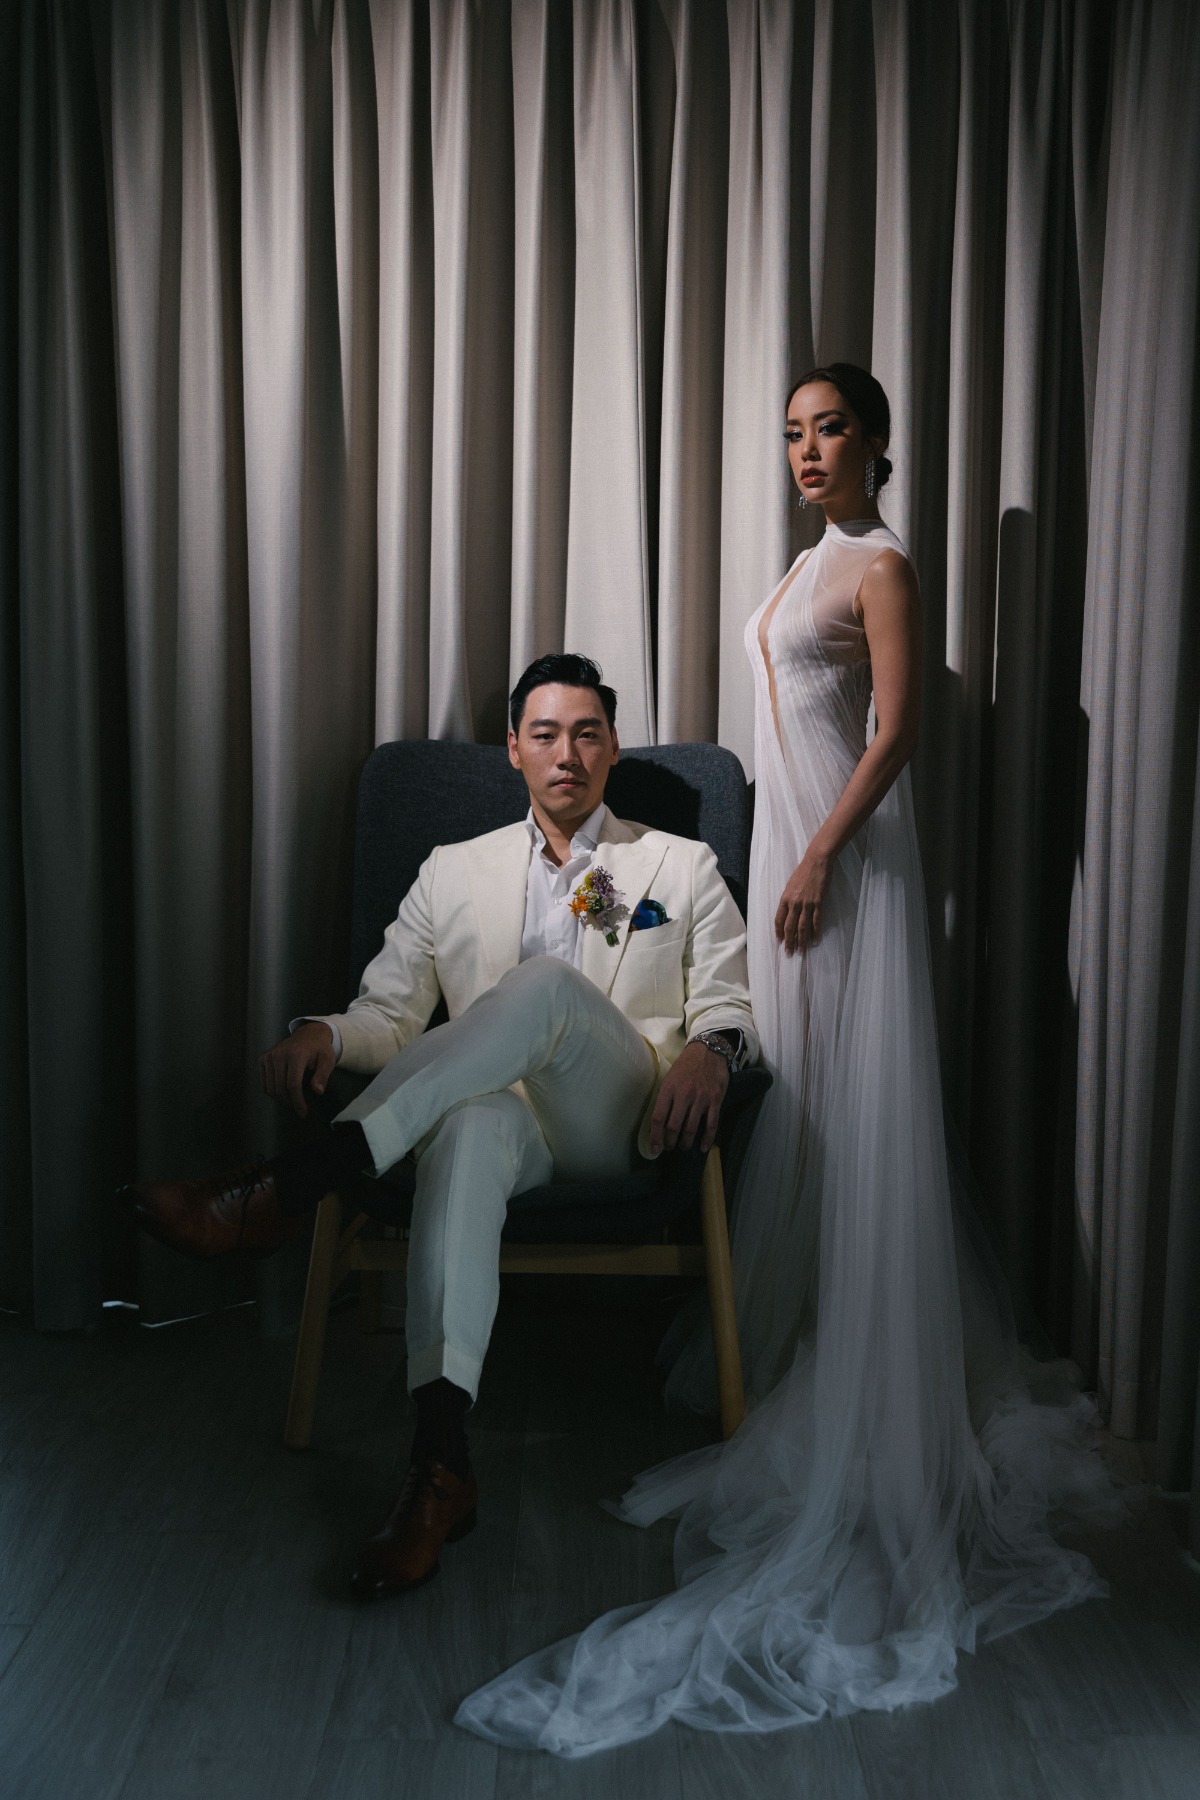 Dramatic couture bride and groom fashion